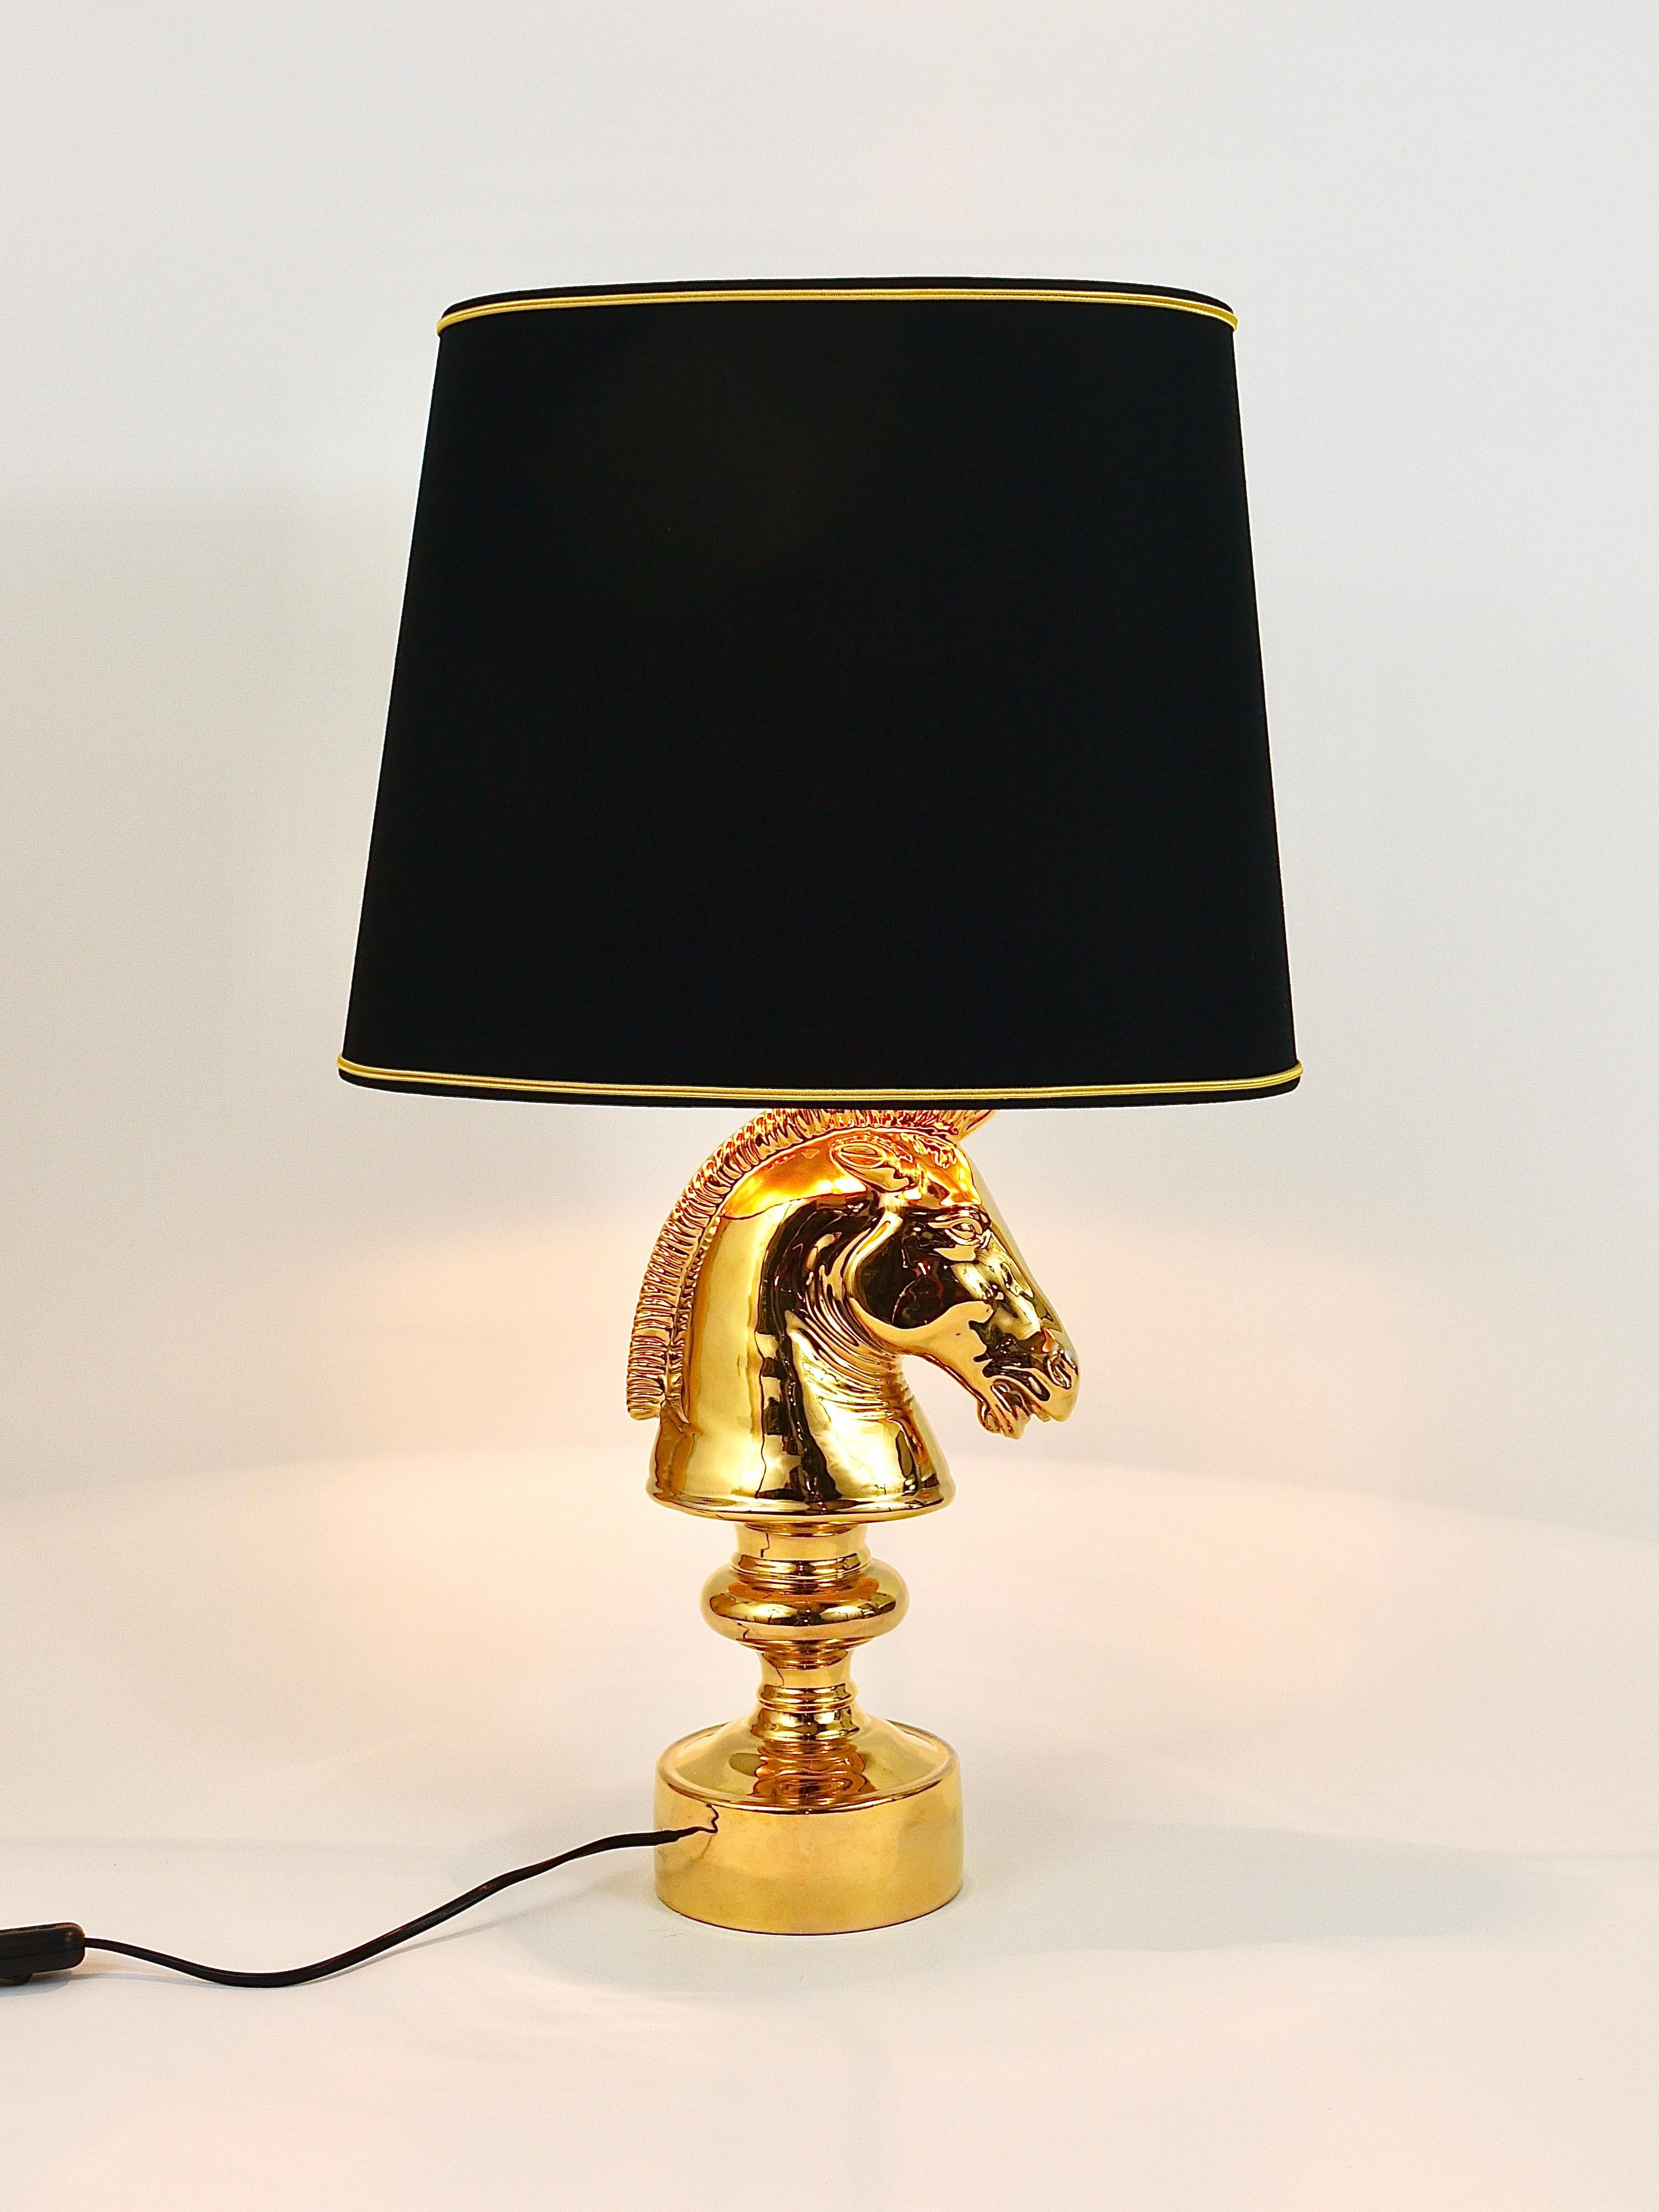 Golden Hollywood Regency Horse Sculpture Table or Side Lamp, Italy, 1970s For Sale 7